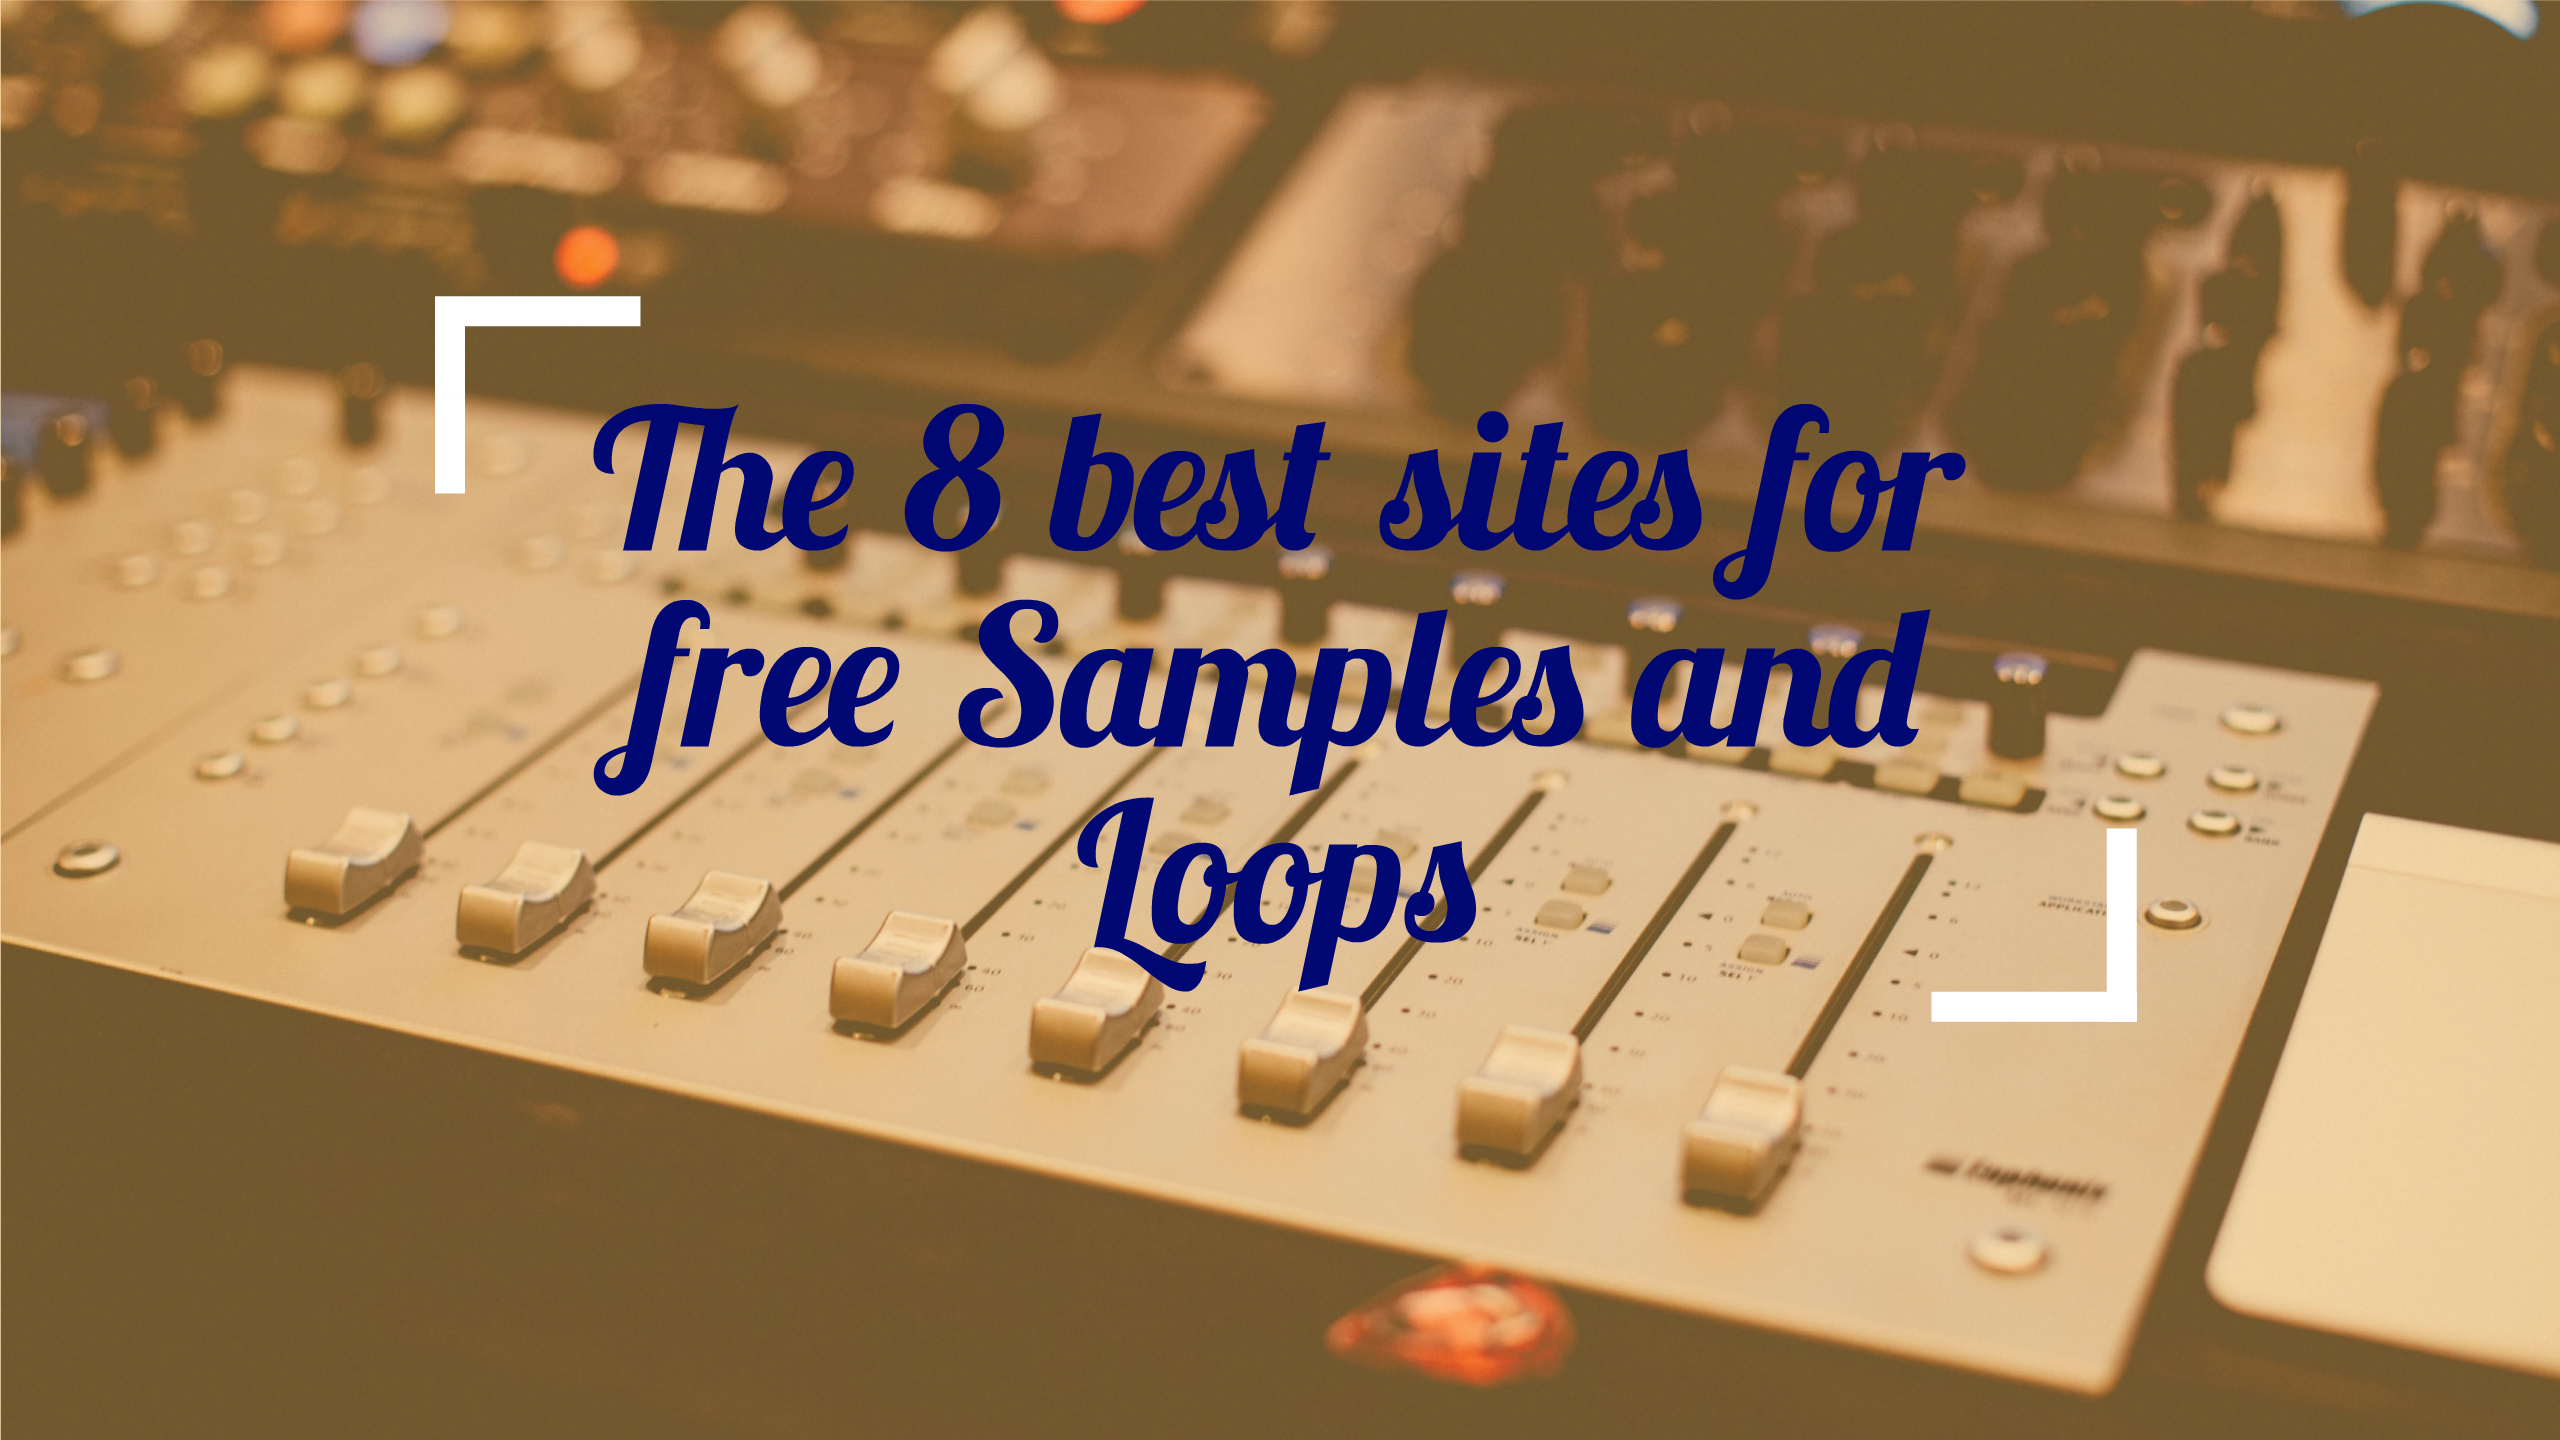 The 7 best sites for free Samples and Loops